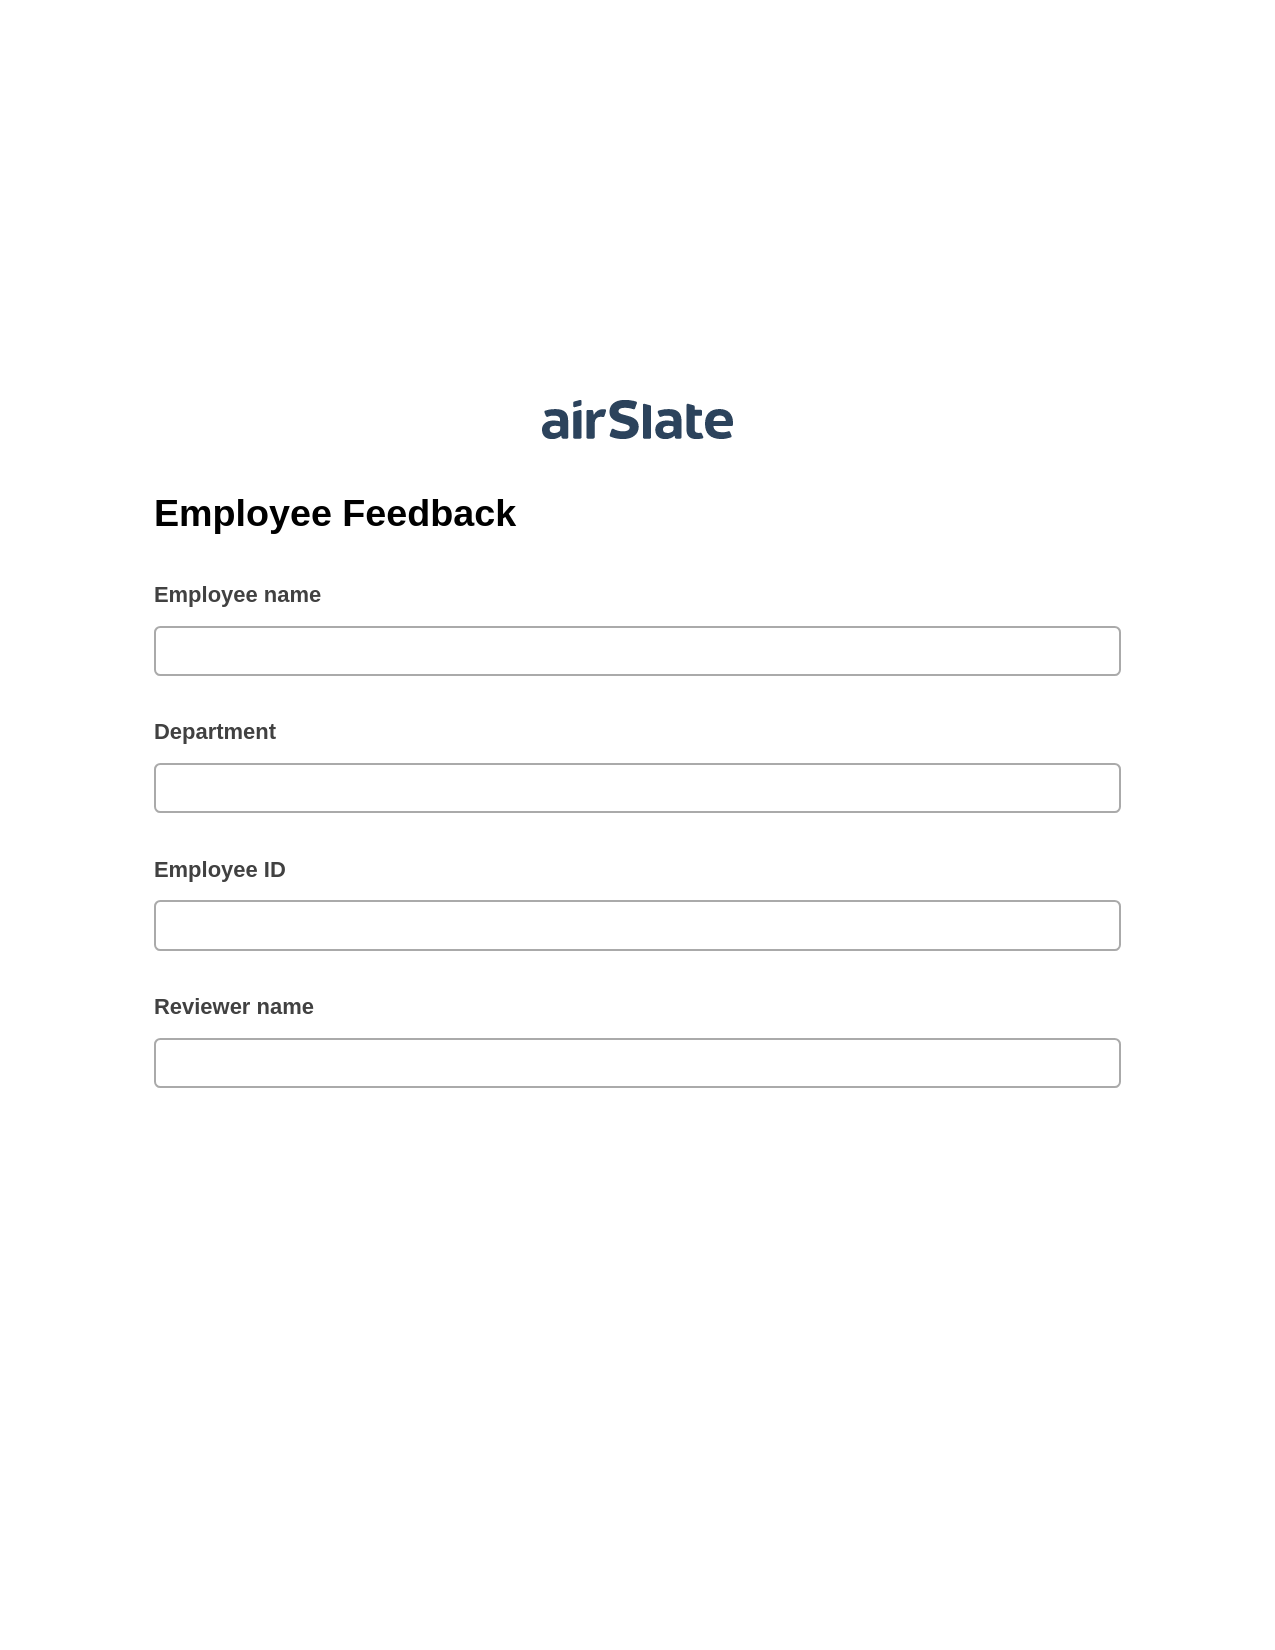 Employee Feedback Pre-fill from Google Sheet Dropdown Options Bot, Roles Reminder Bot, Export to Salesforce Bot